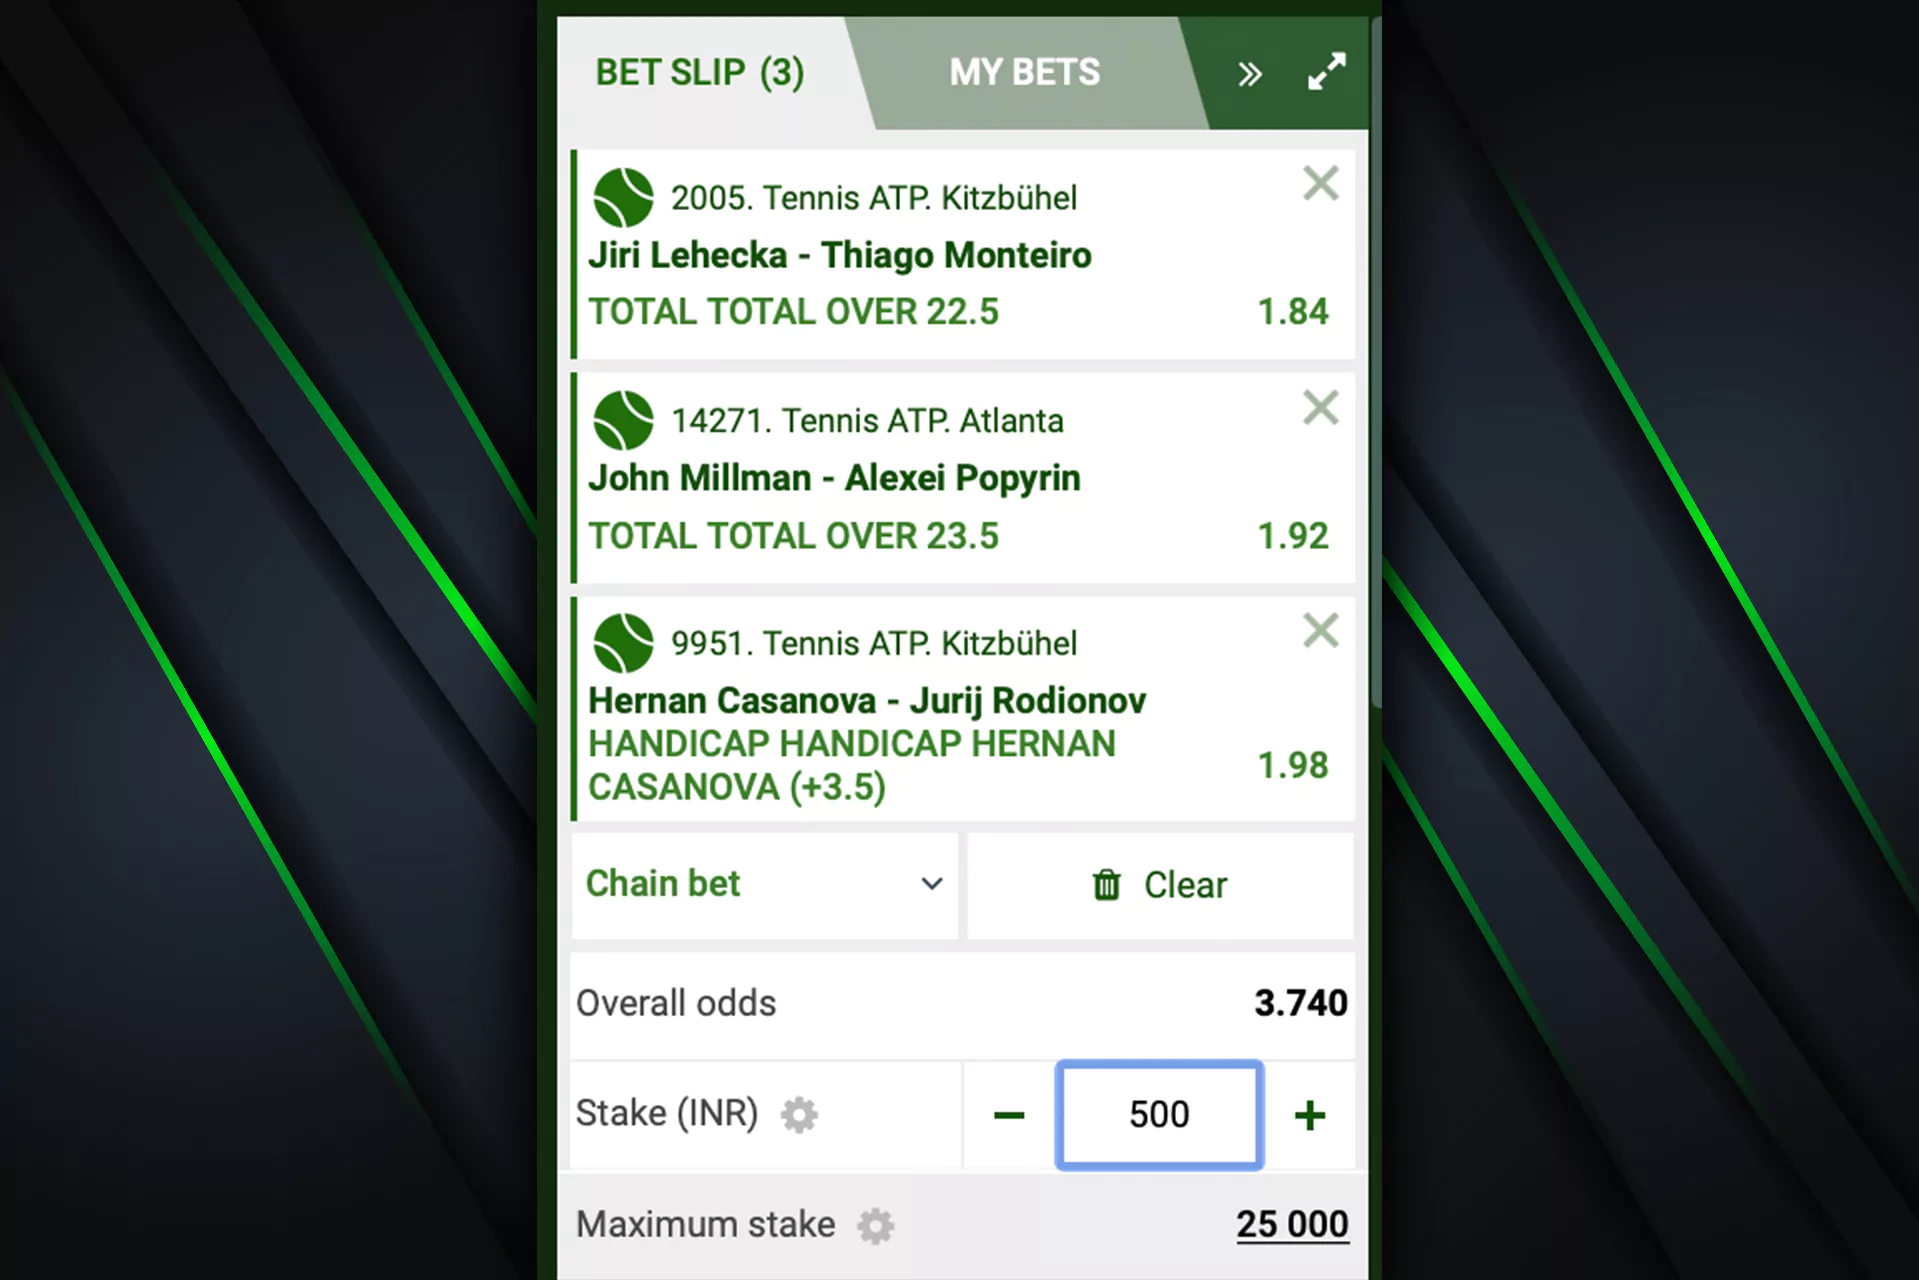 Win just one bet to get money for other bets in this type.